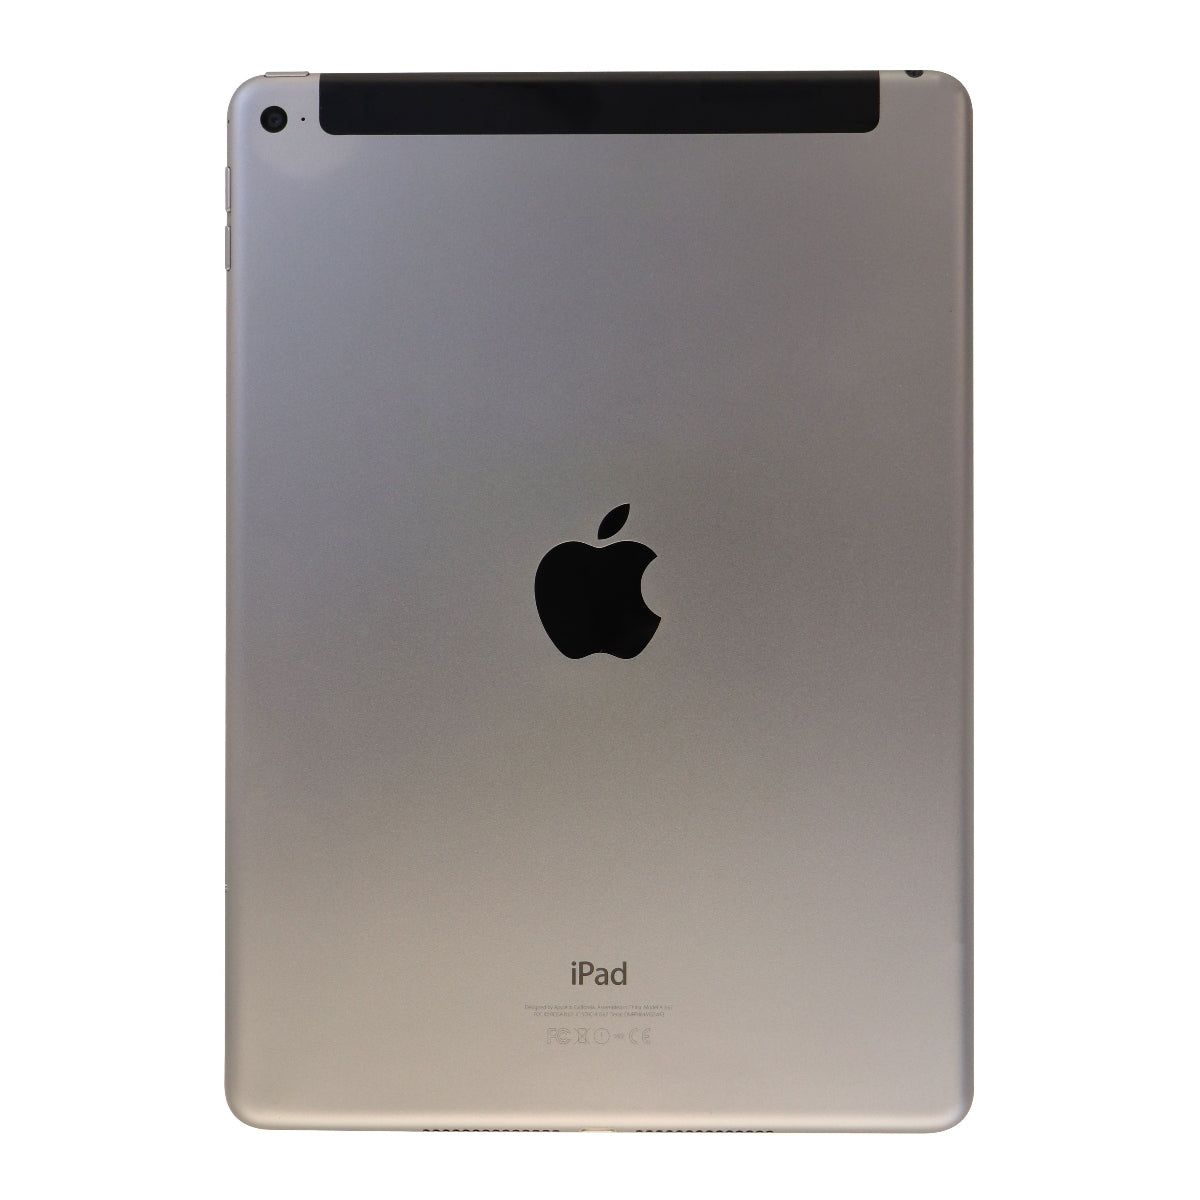 Apple iPad Air 2 - A1567 2nd Generation Tablet (AT&T + Wi-Fi) Space Gray 16GB iPads, Tablets & eBook Readers Apple    - Simple Cell Bulk Wholesale Pricing - USA Seller